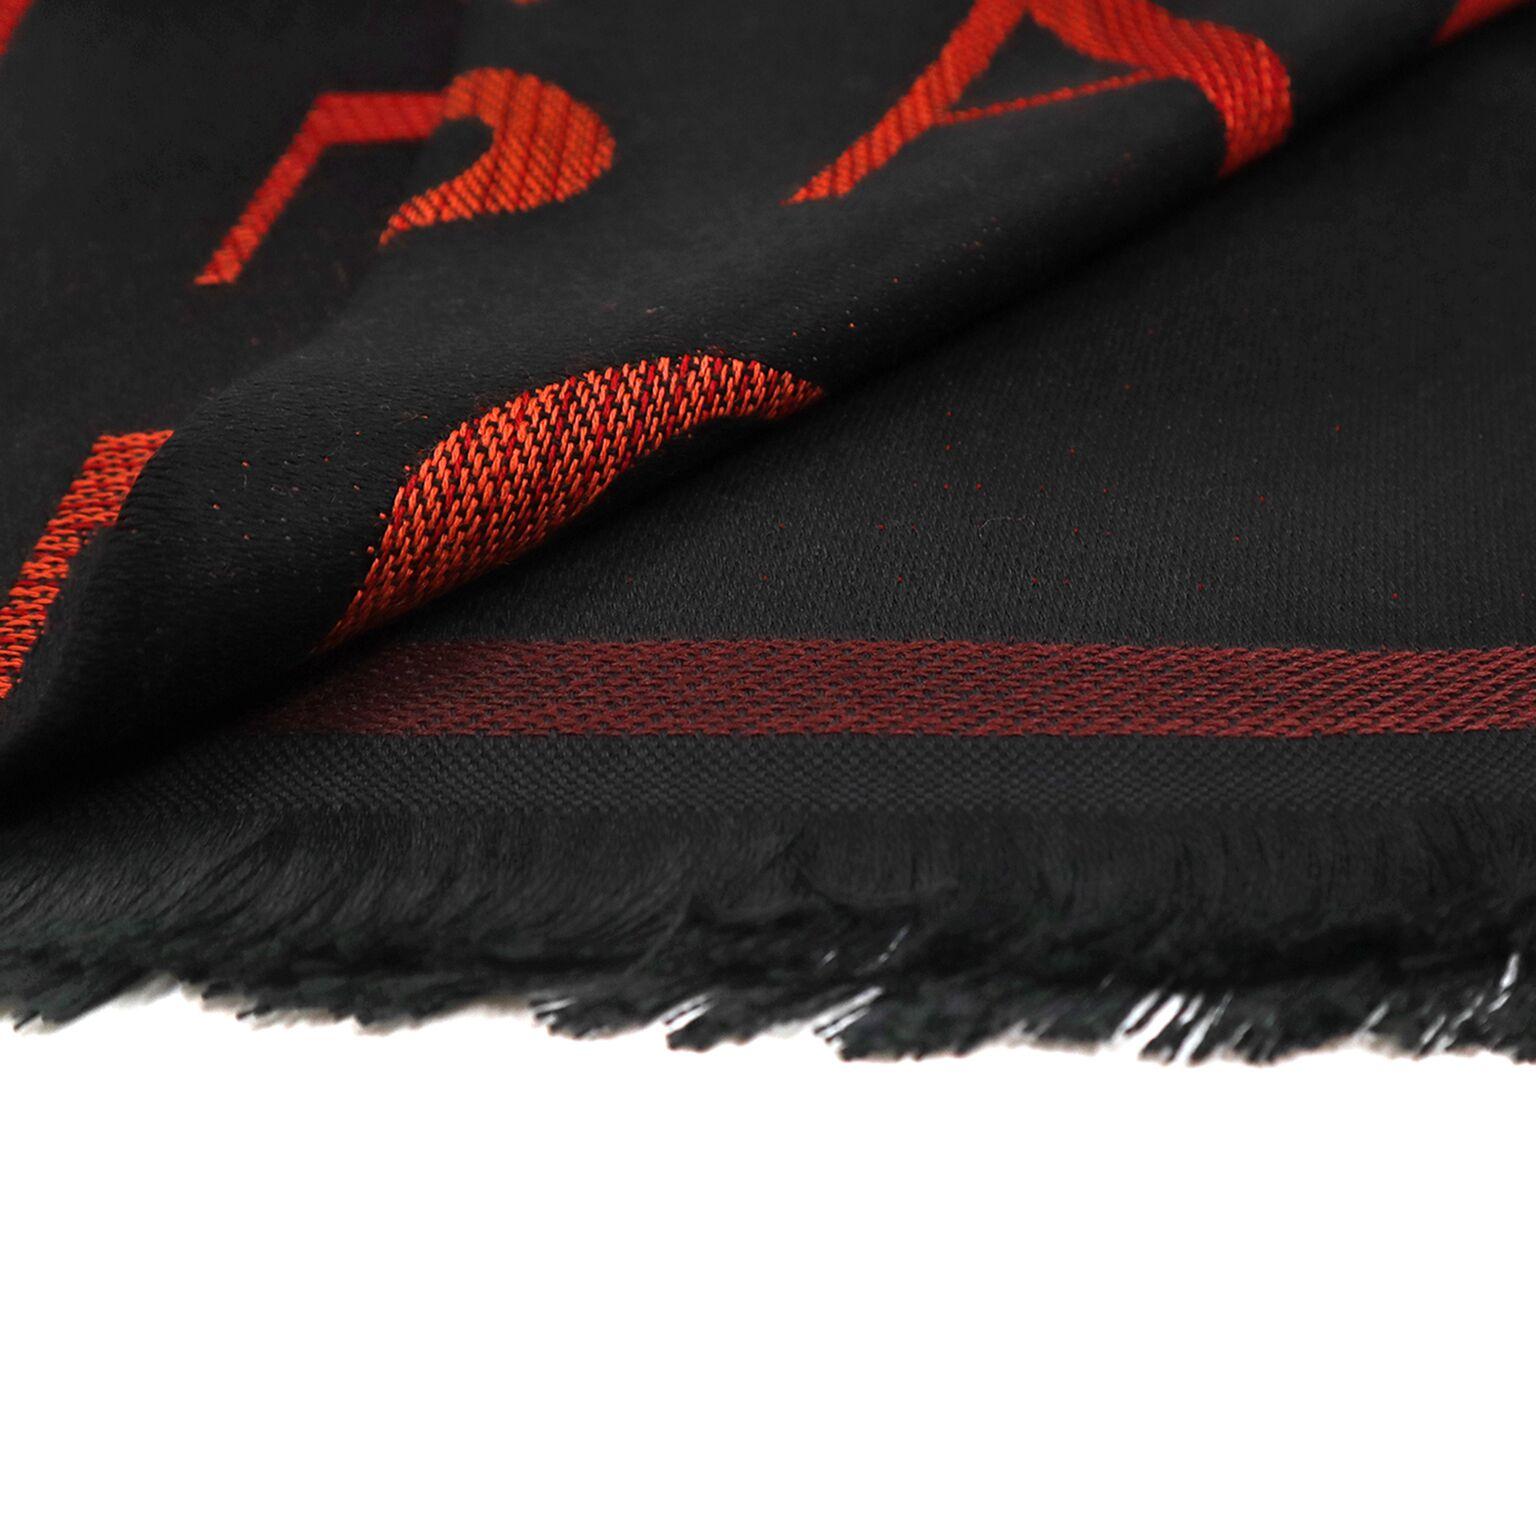 This is beautiful Versace men's scarf made of 50% Wool 50% Acrylic.
Dimensions: 73*15 inch.
Made in Italy. 